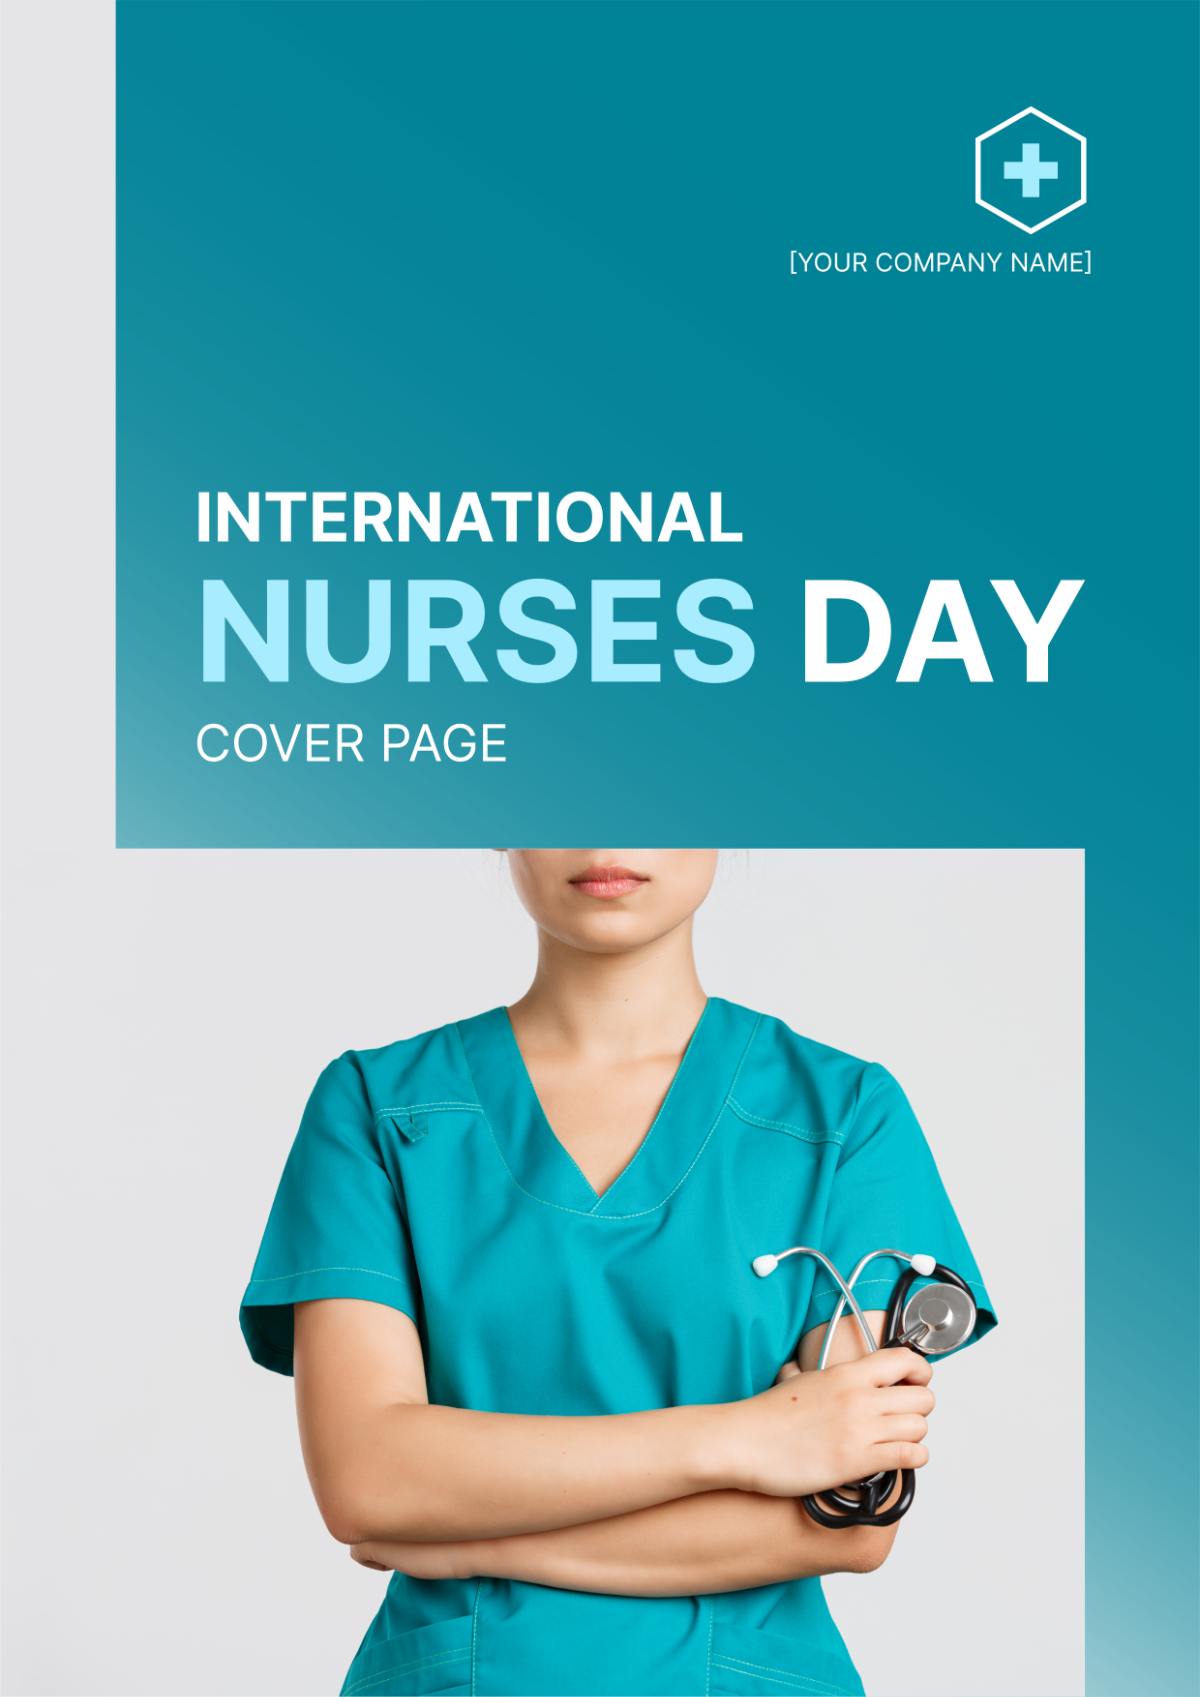 Free International Nurses Day Cover Page Template